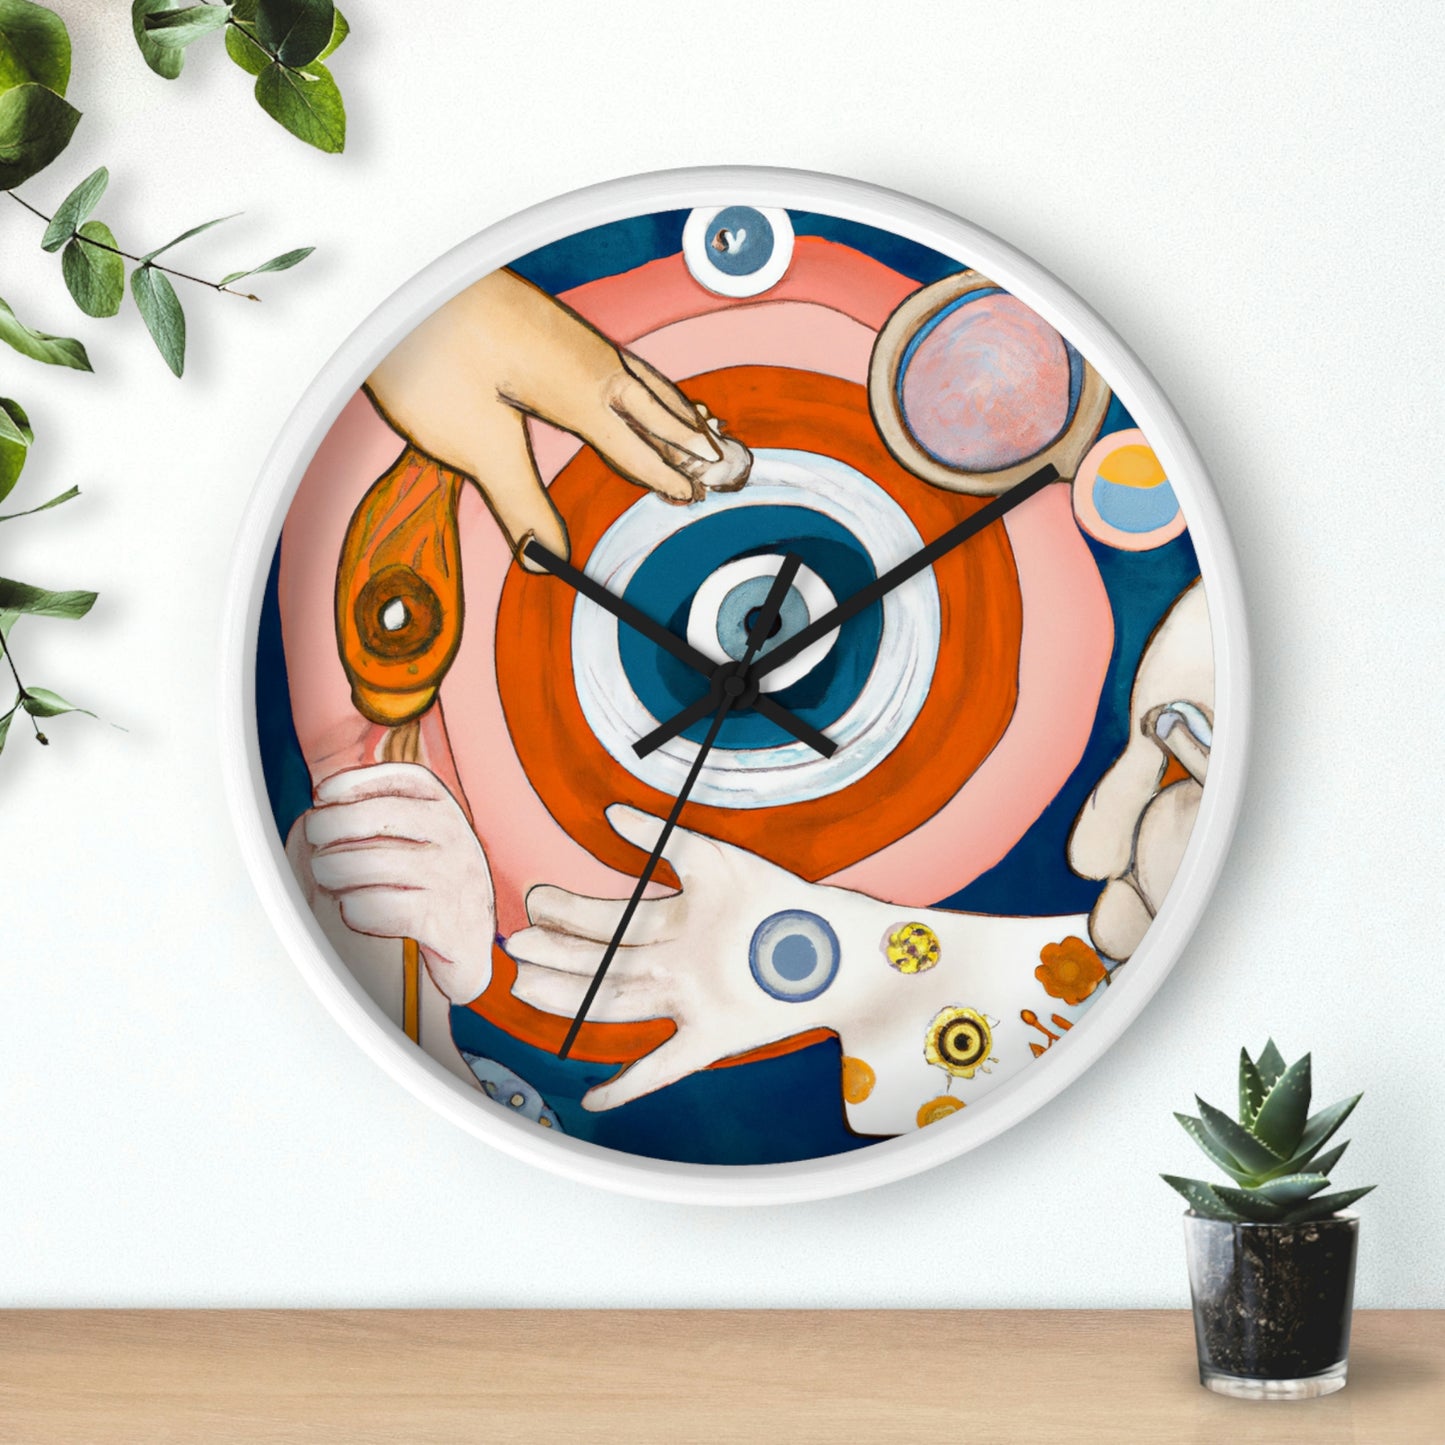 takes them on an adventure

A Twist of Magic: An Elderly Person's Unexpected Journey - The Alien Wall Clock